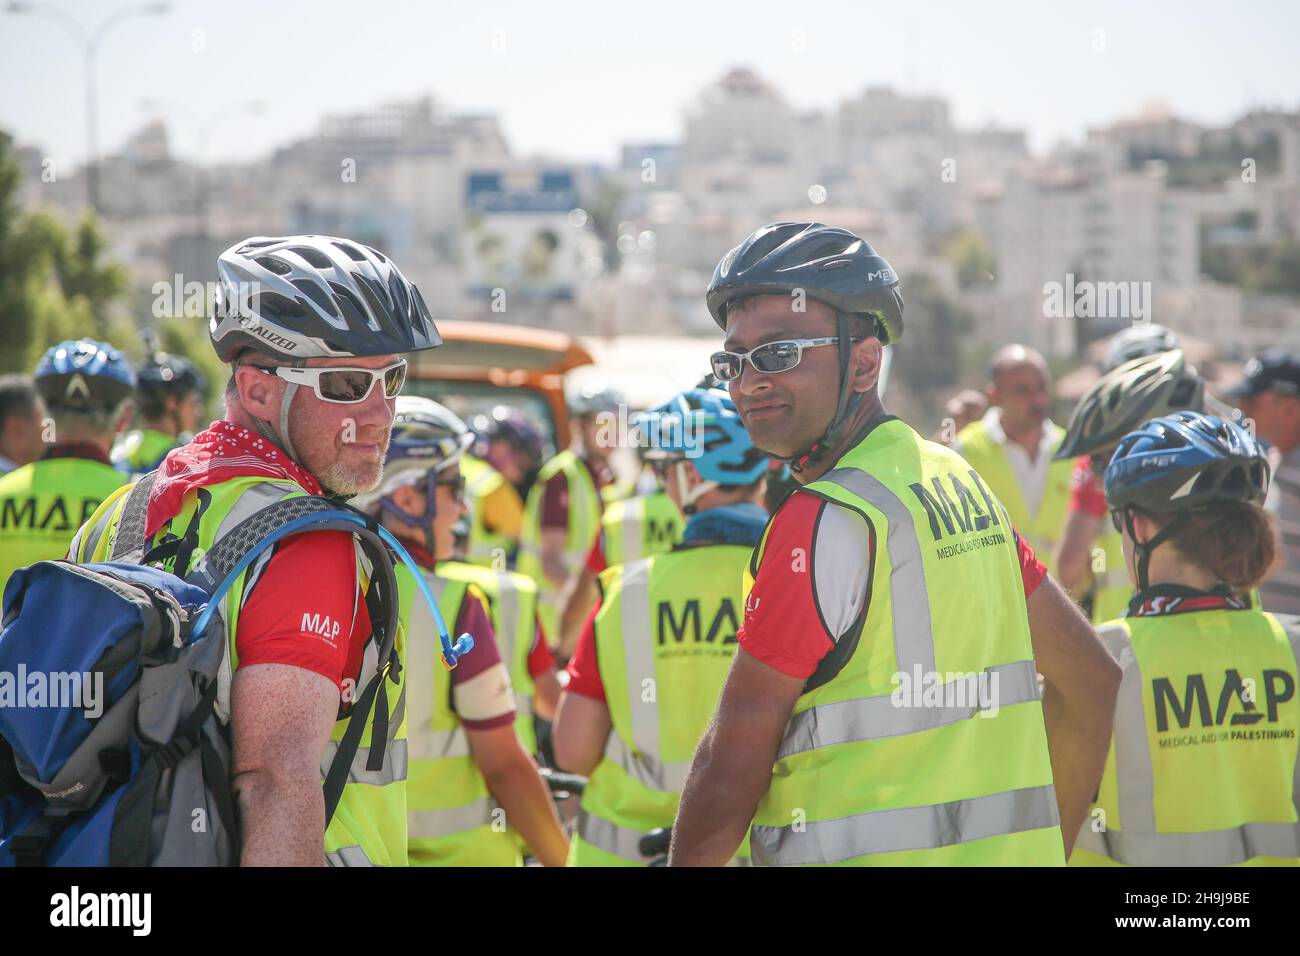 Ben Cosh (left) and Jatinder Sanghera take a rest before entering Hebron in Palestine. General views of a fundraiser cycling trip around the West Bank of Palestine organised by British charity Medical Aid for Palestinians in 2015 Stock Photo